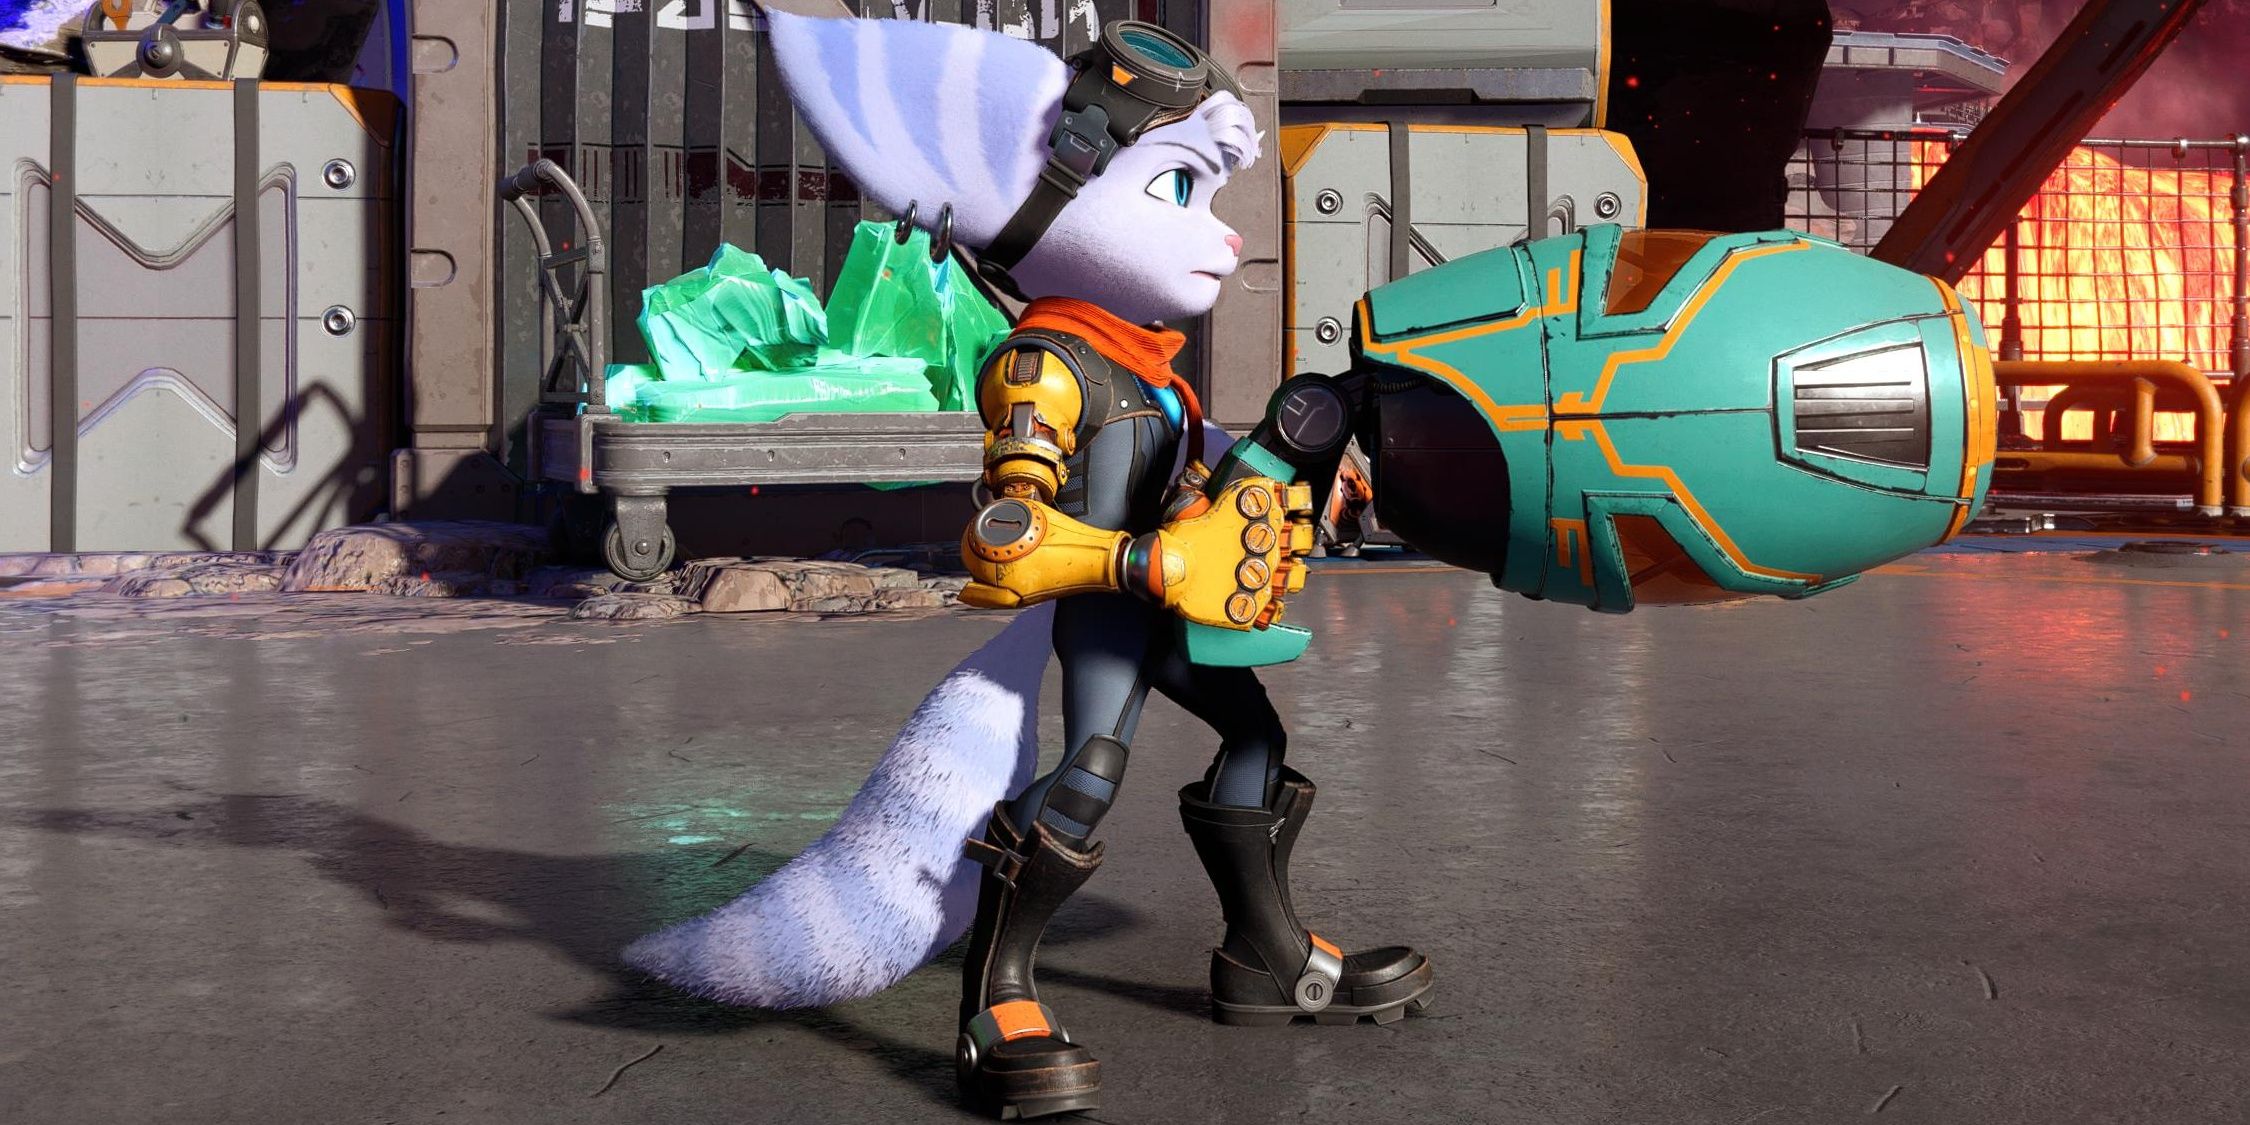 Rivet standing and pointing the Ricochet weapon in Ratchet and Clank: Rift Apart